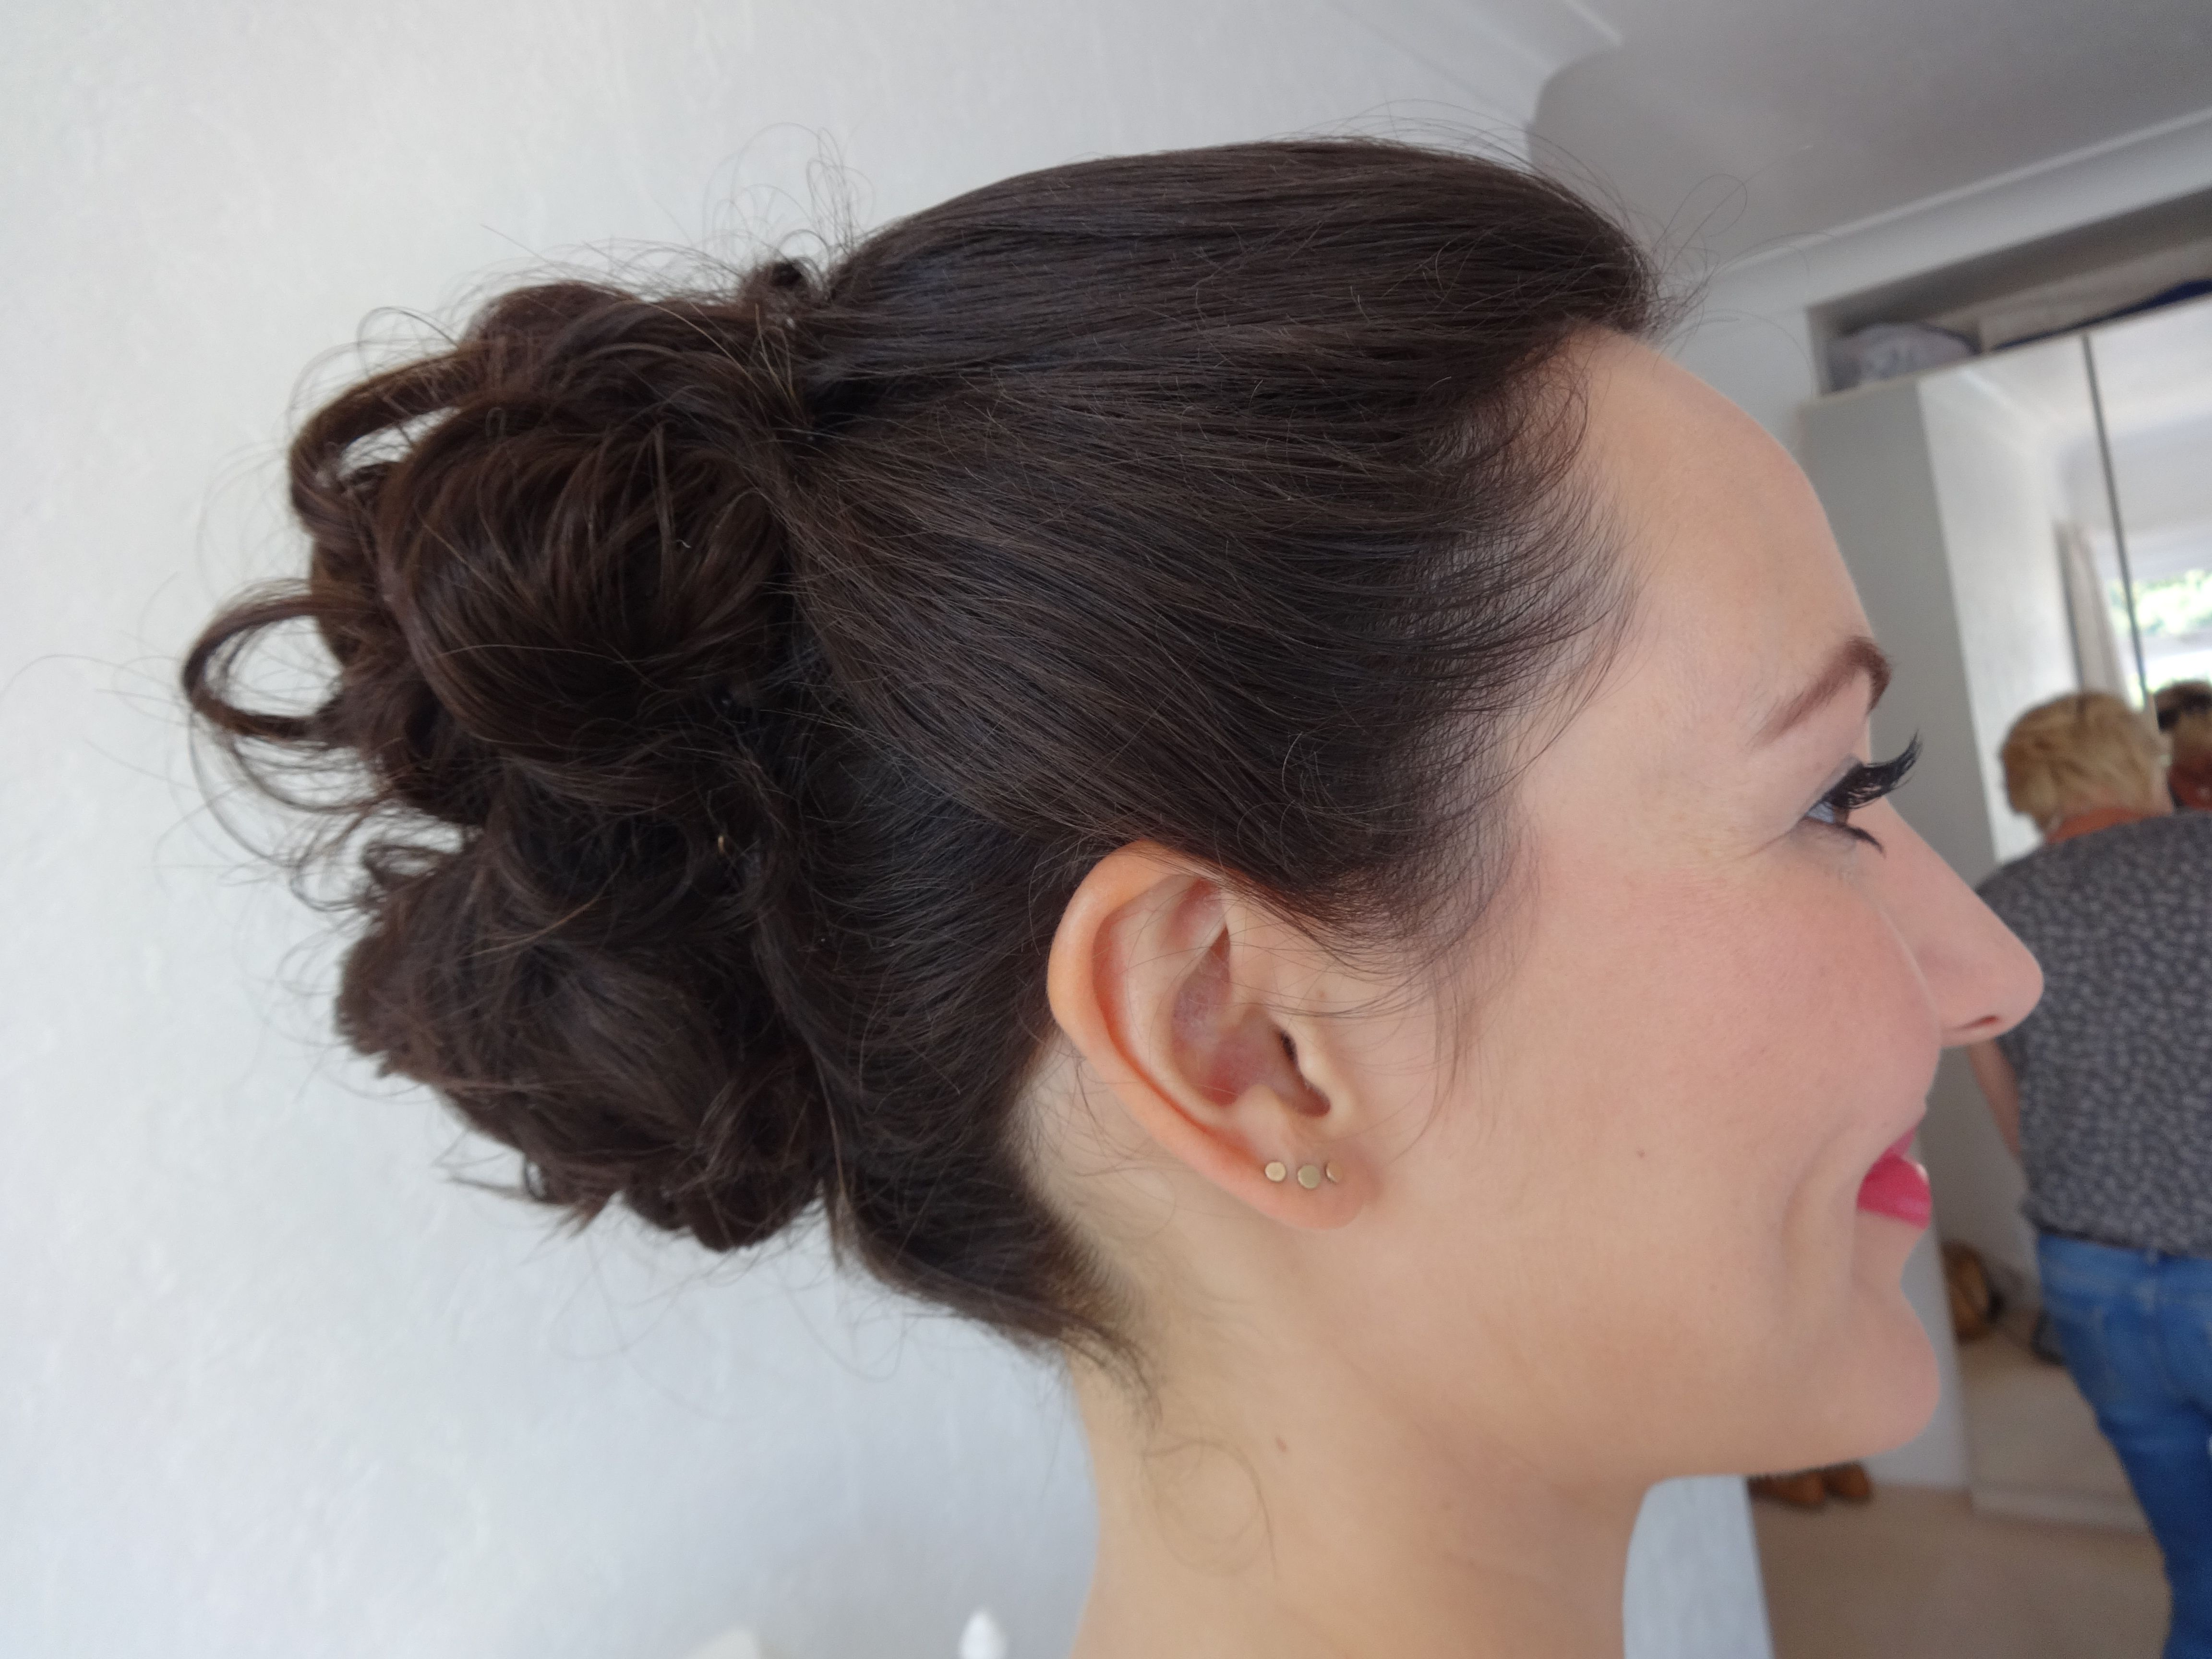 How to fake an 'up-do' with short hair